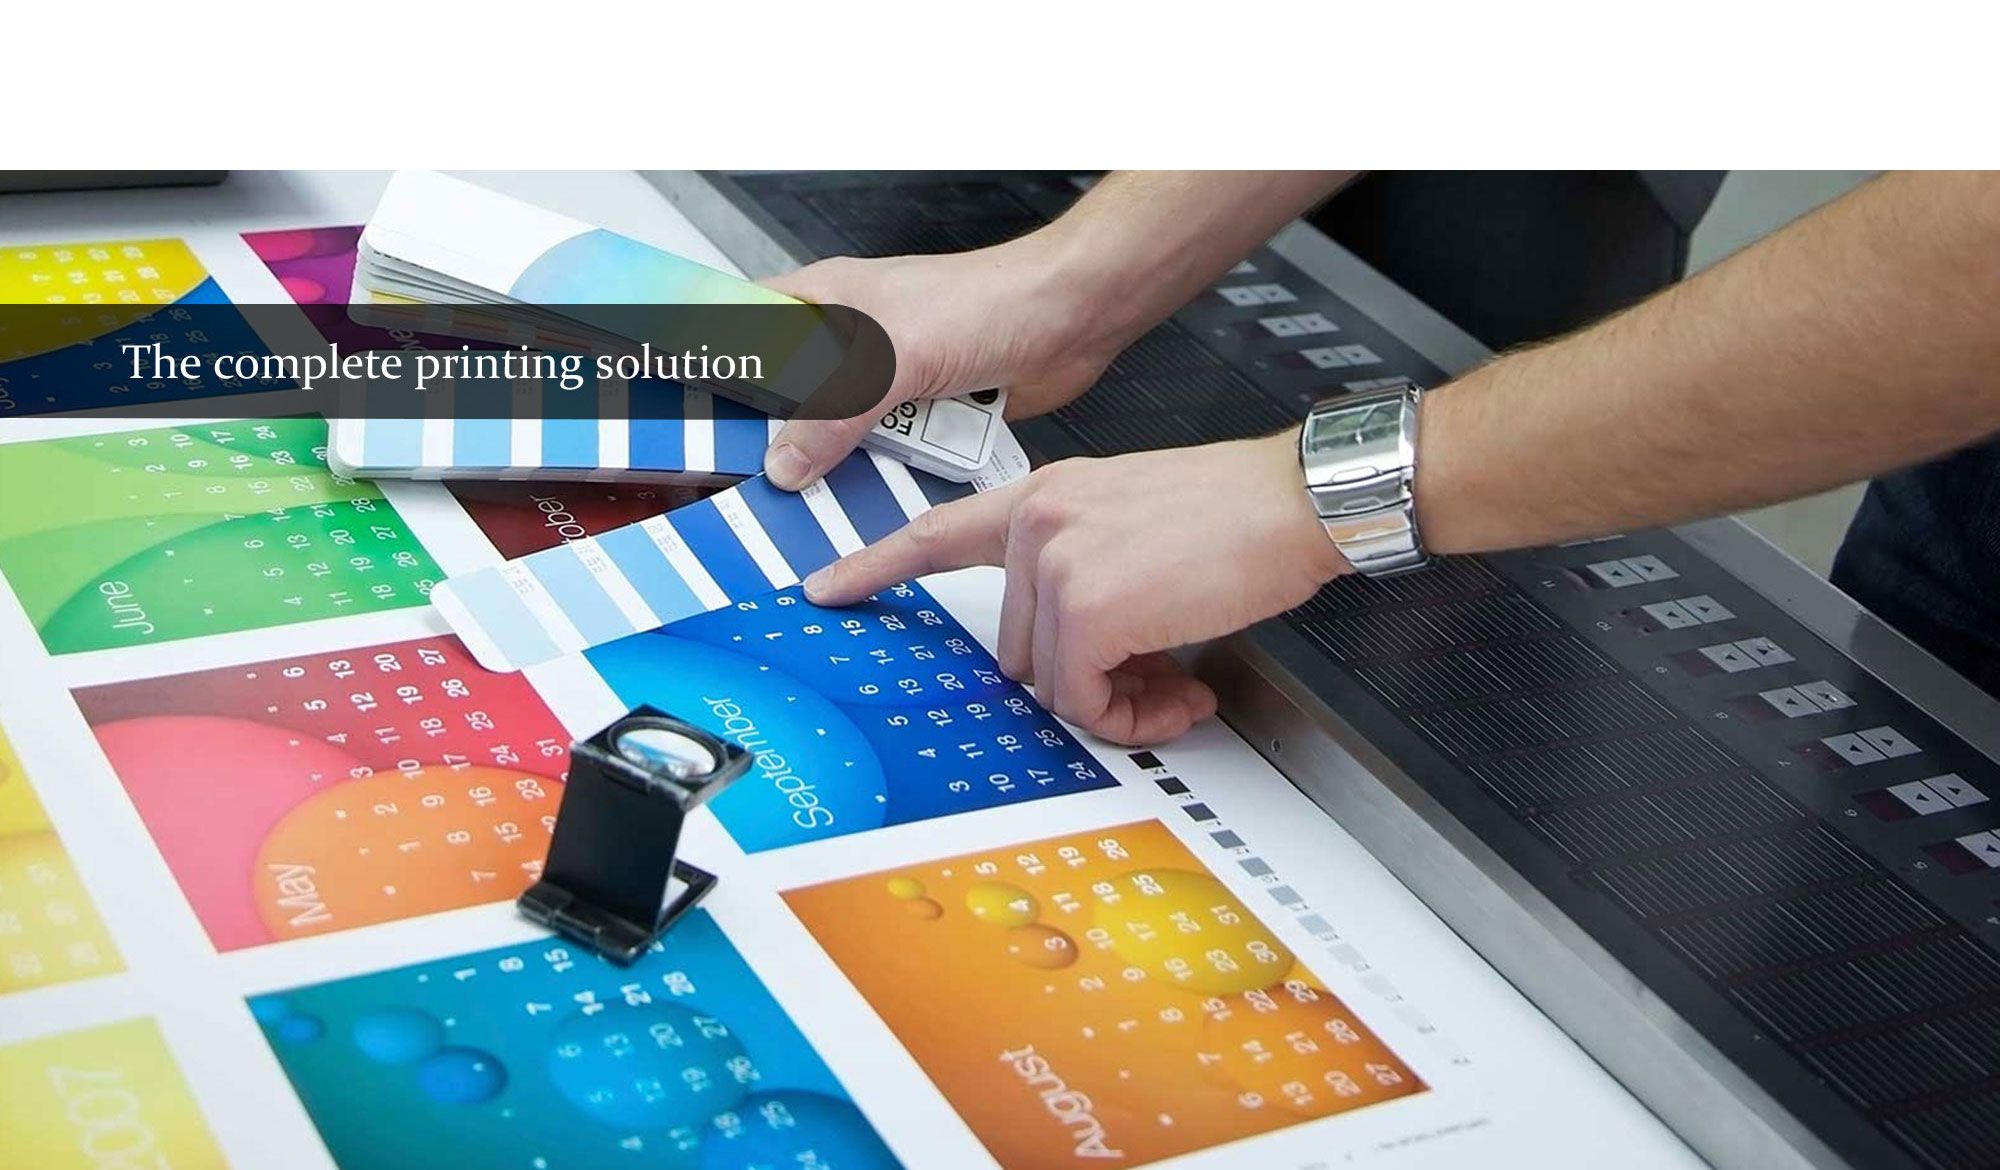 The complete printing solution